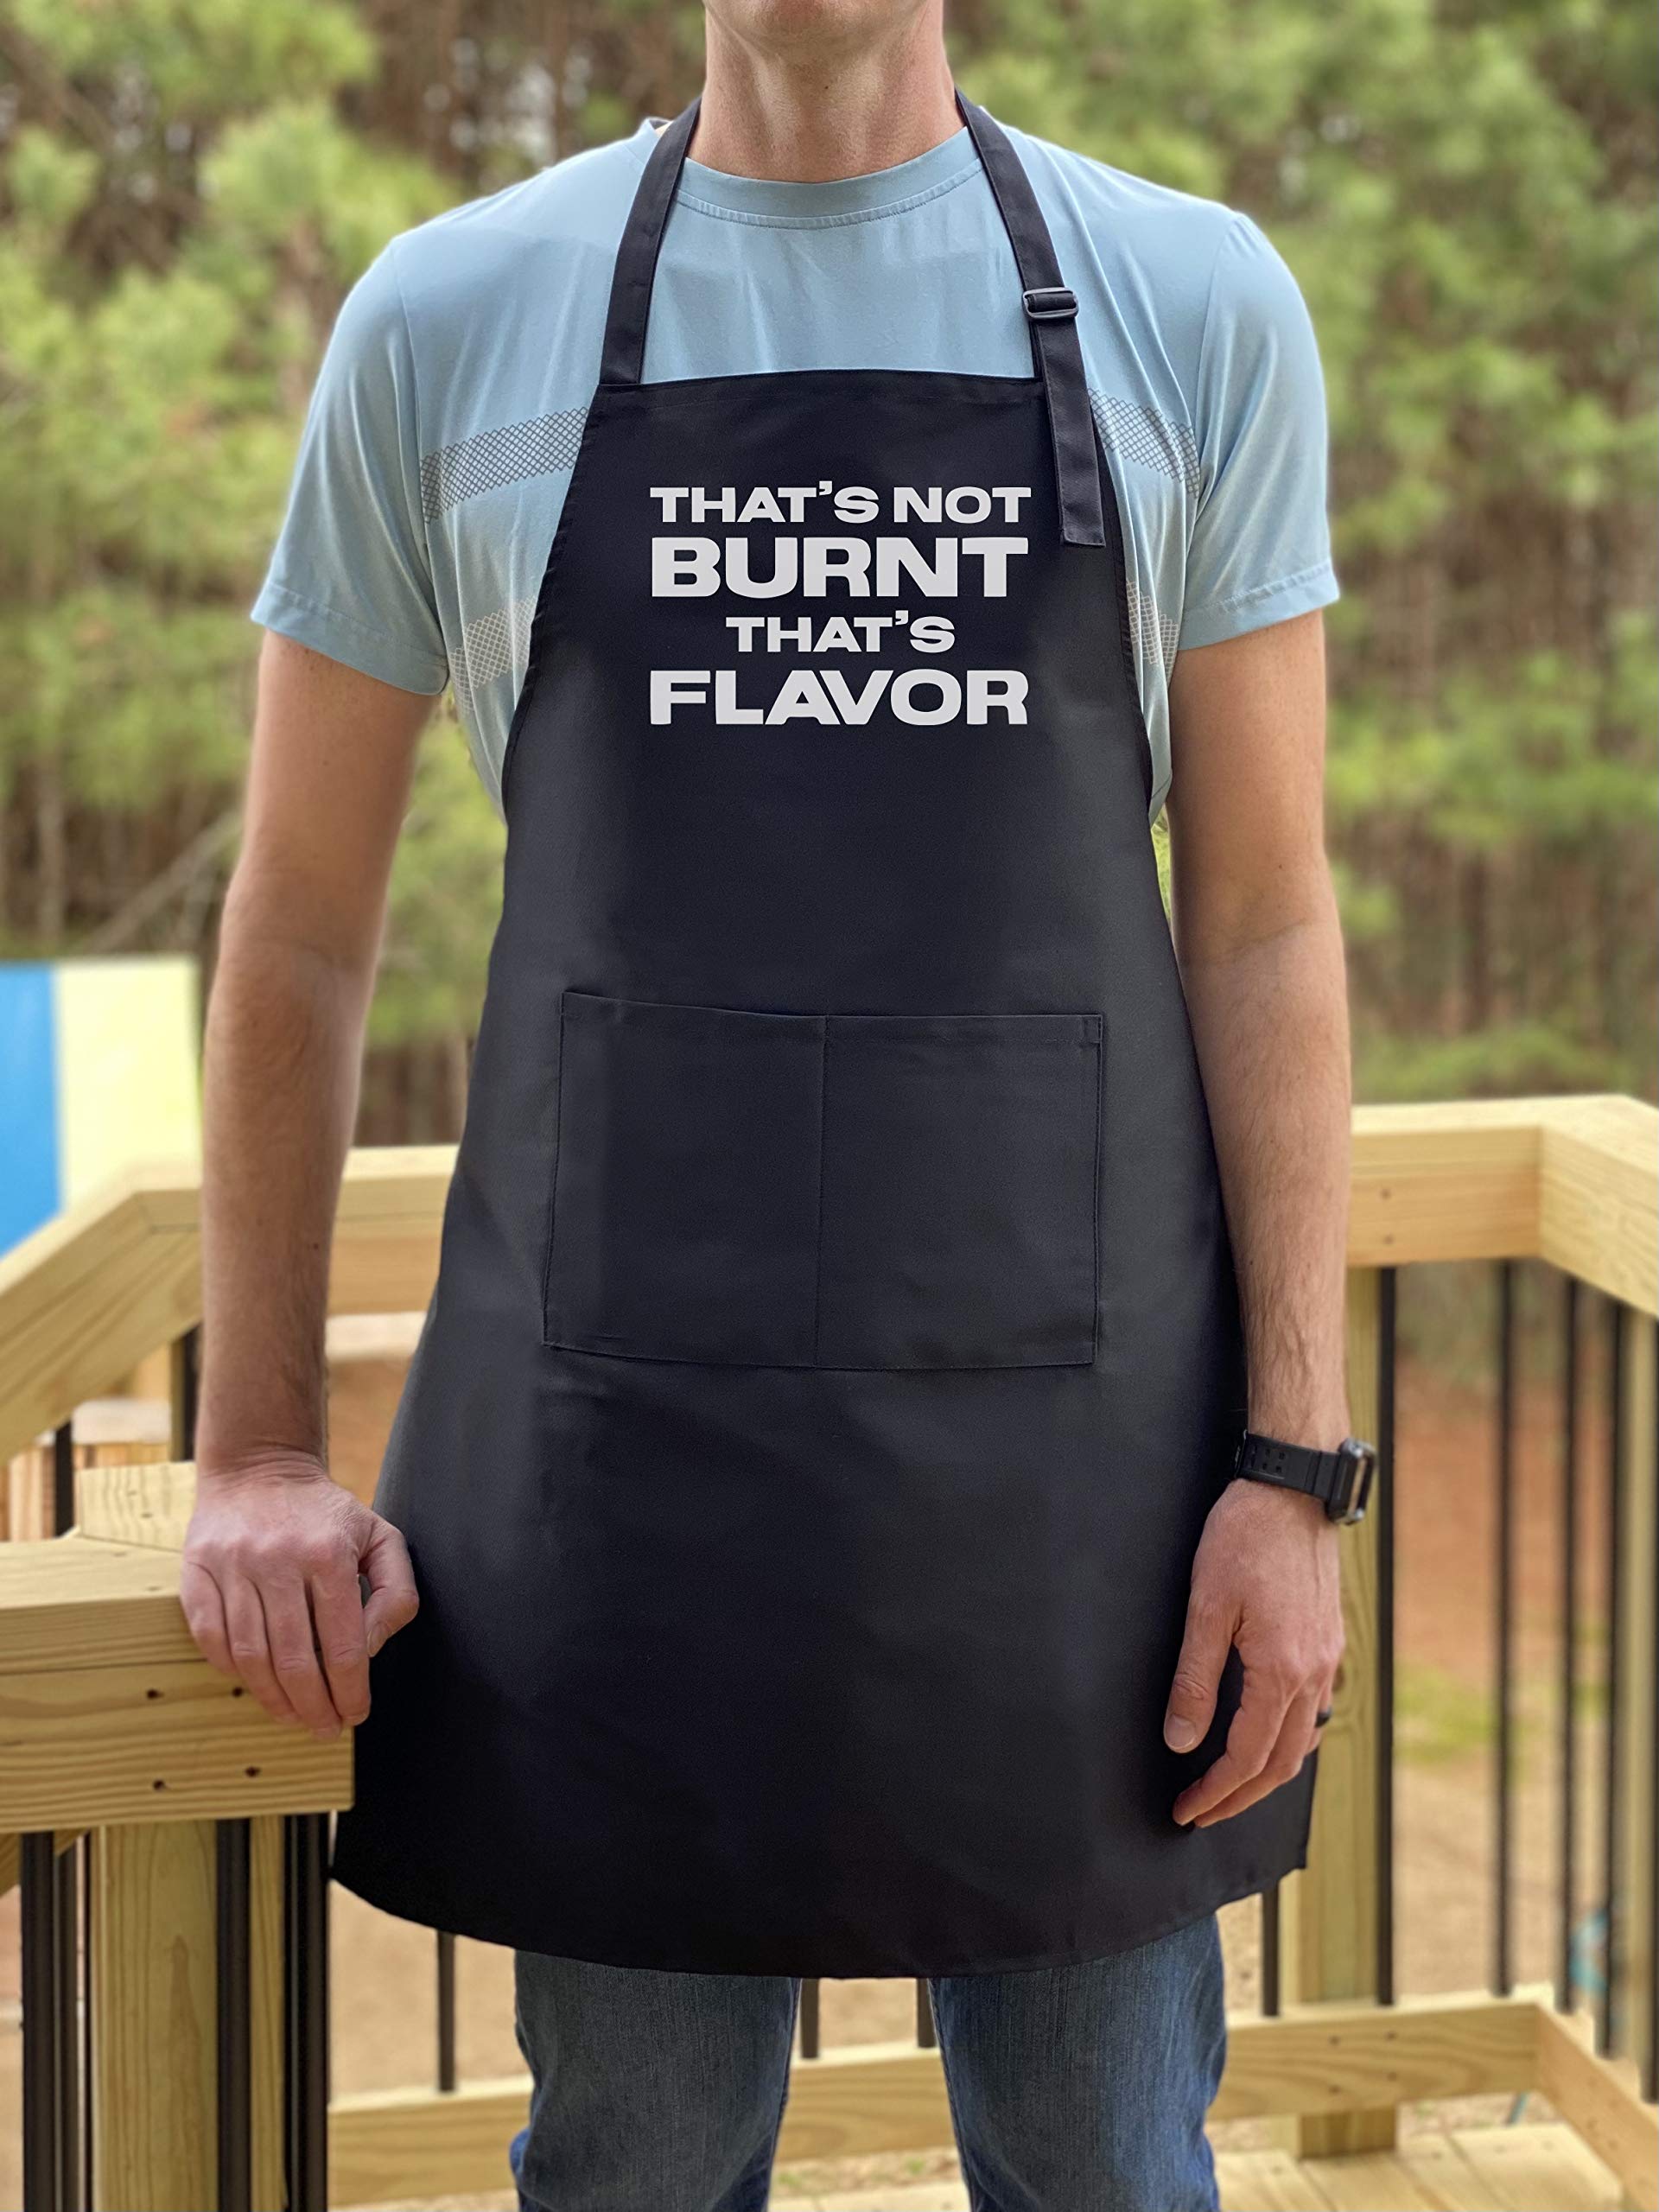 UP THE MOMENT That's Not Burnt That's Flavor Apron, Funny Apron for Men, BBQ Grill Apron, Chef Apron, Funny Apron for Dad, Mens Funny Apron, Funny Chef Apron for Men